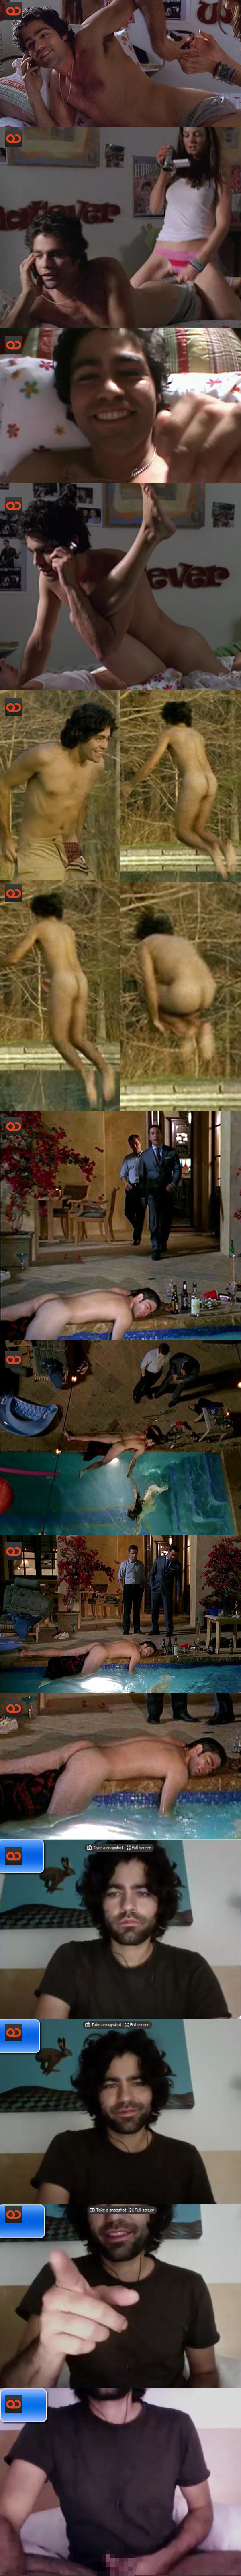 Adrian Grenier, American Actor From HBO's Entourage Series, Caught With His Pants Down!